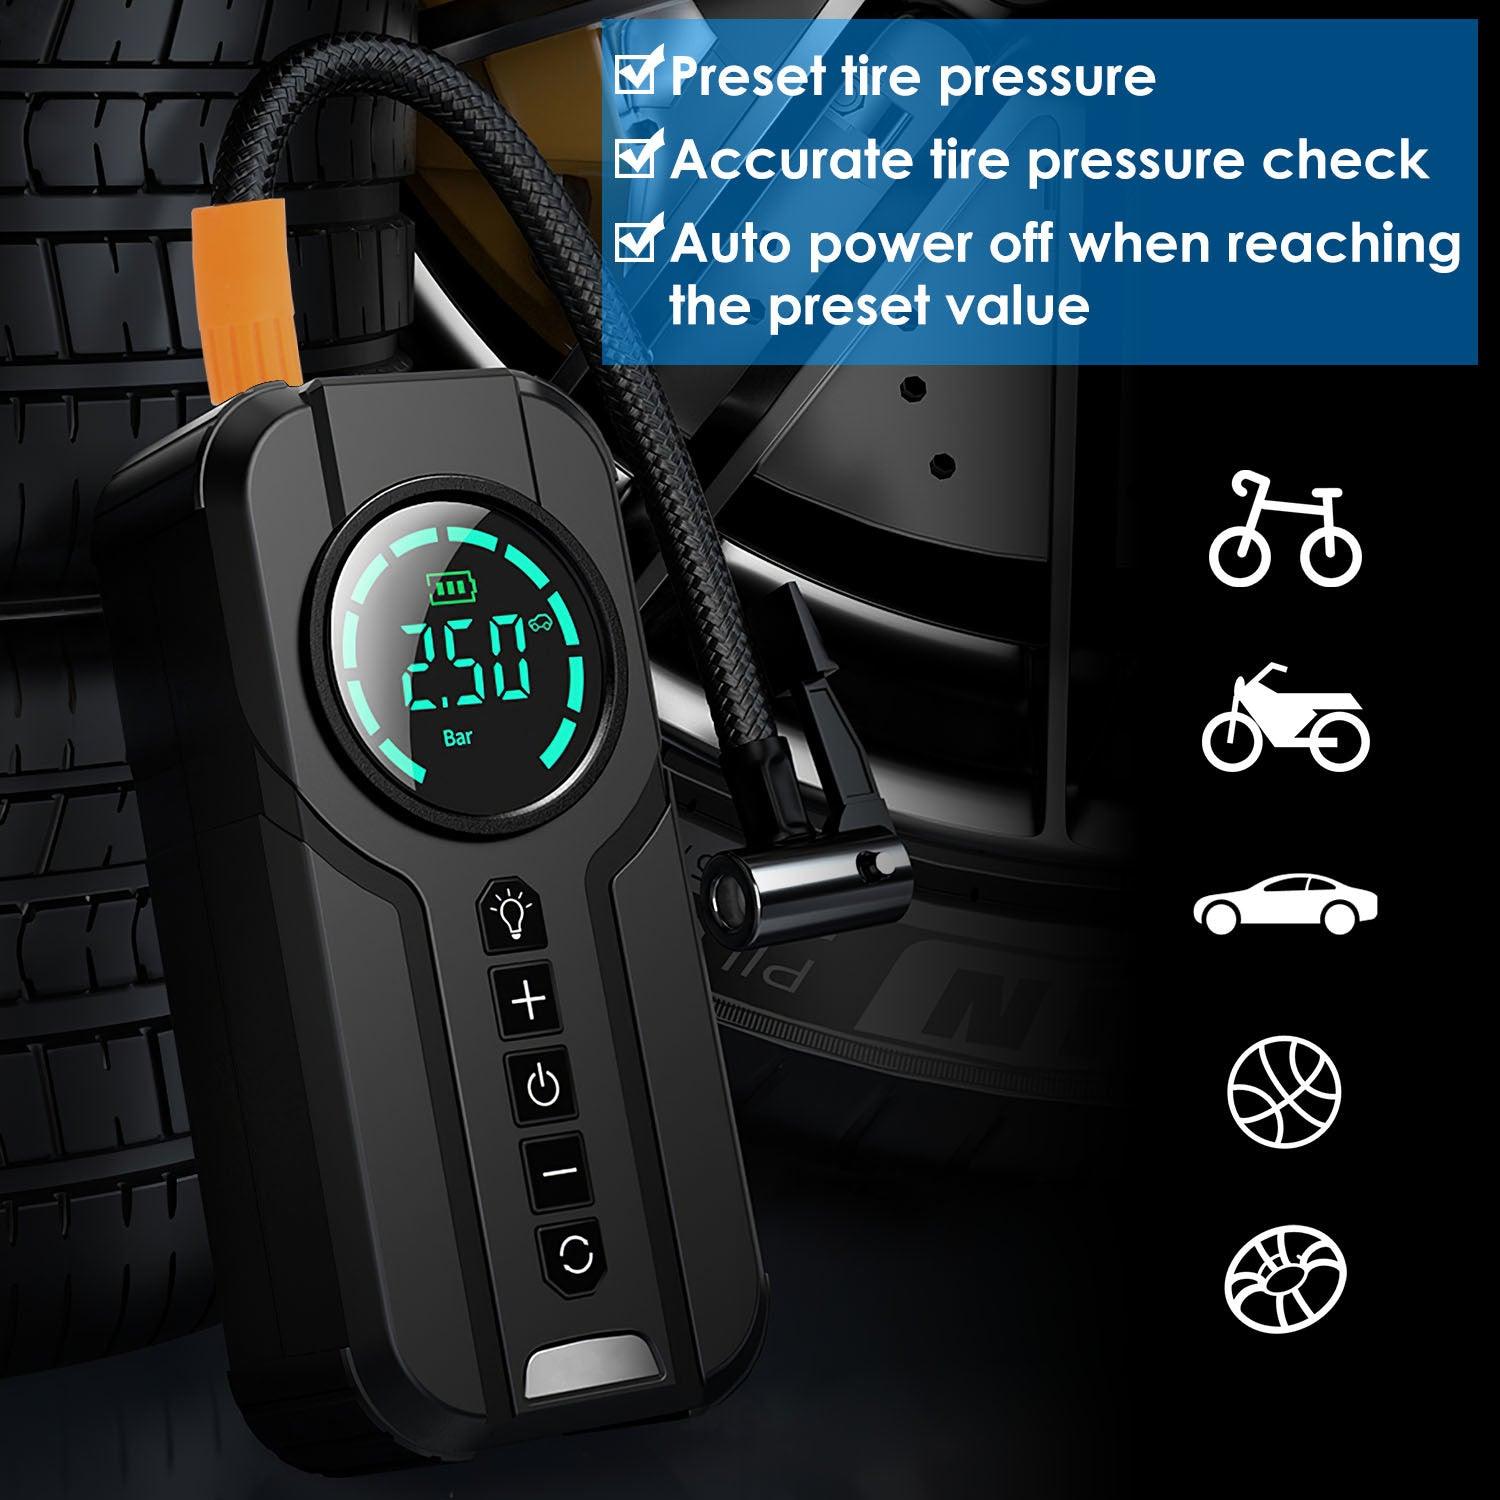 LazyPro F5 Car Tire Inflator Pump Portable Car Air Compressor Wireless Electric Air Pump 150 PSI with LED Light - Lazy Pro